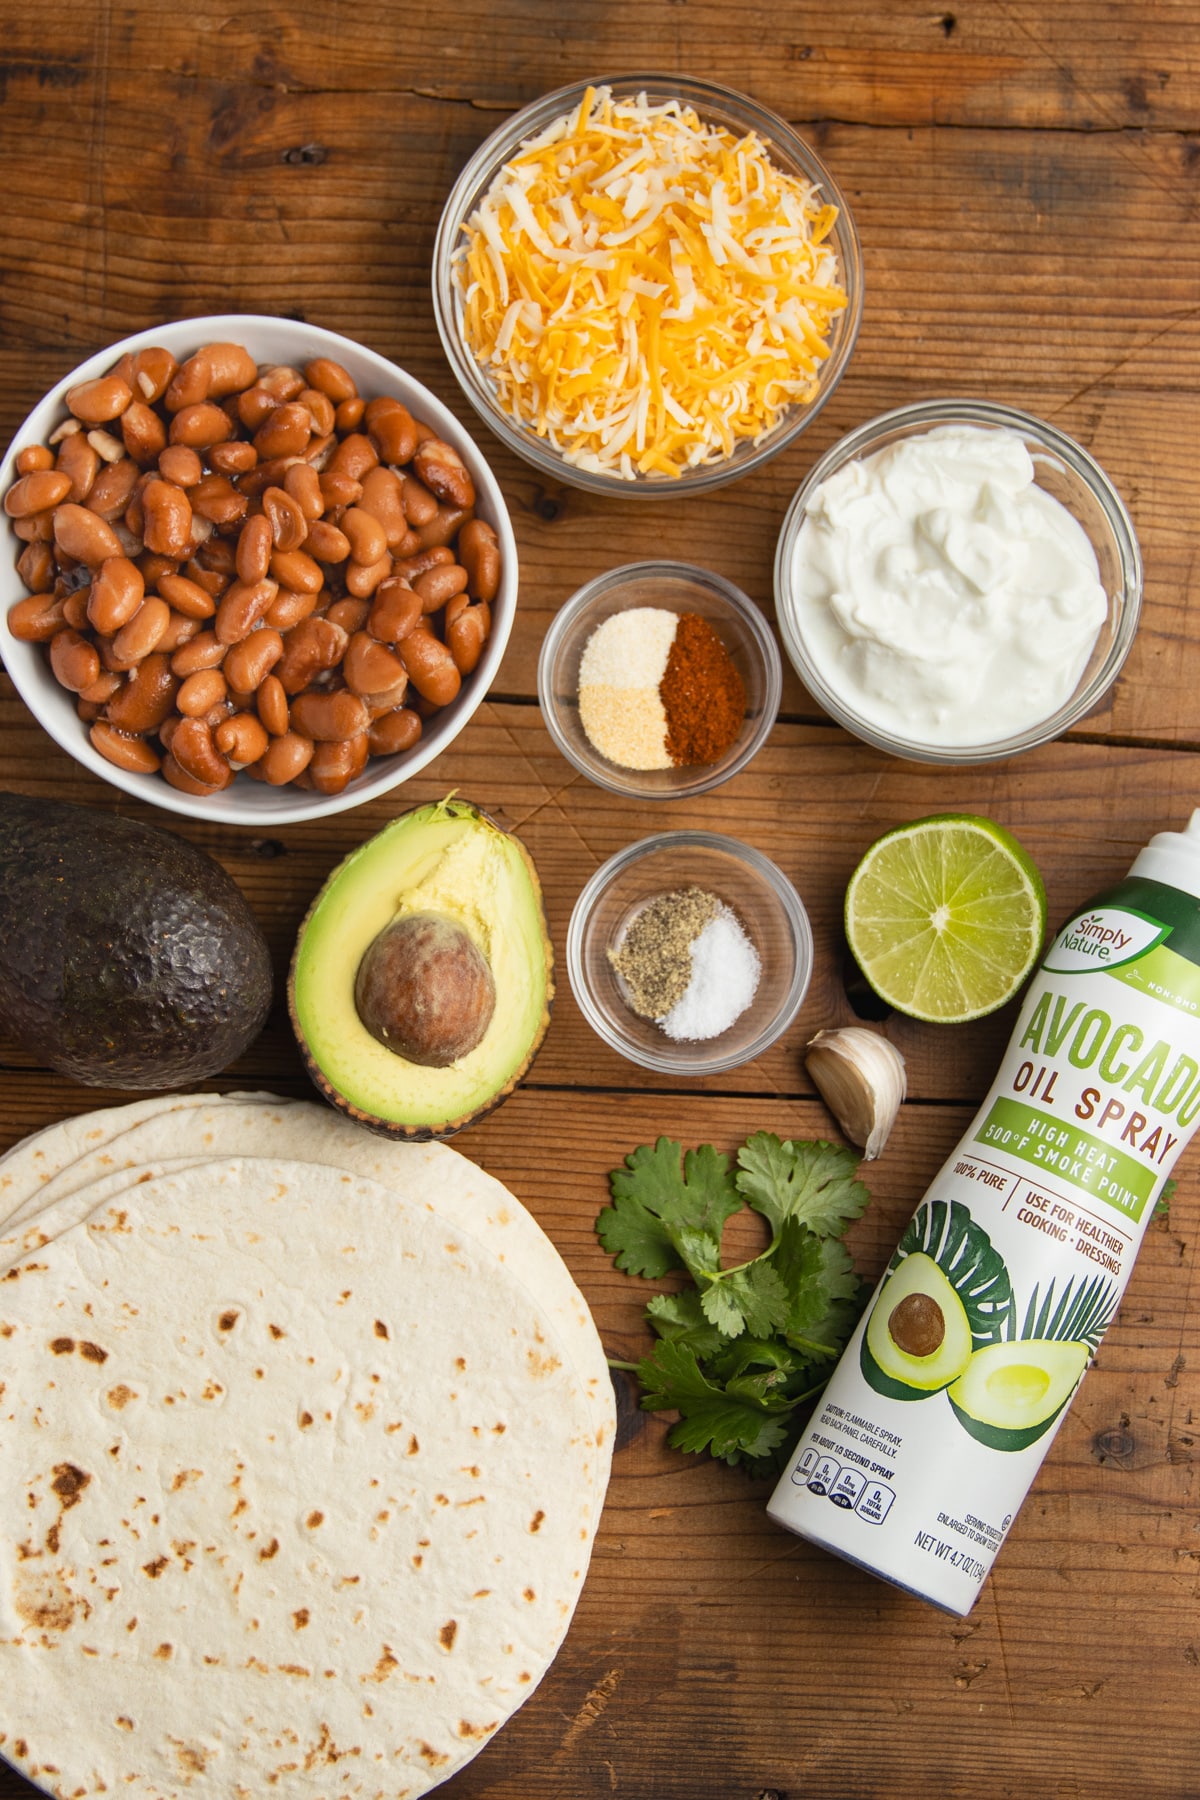 This is the picture of all the ingredients needed to make these tacos.